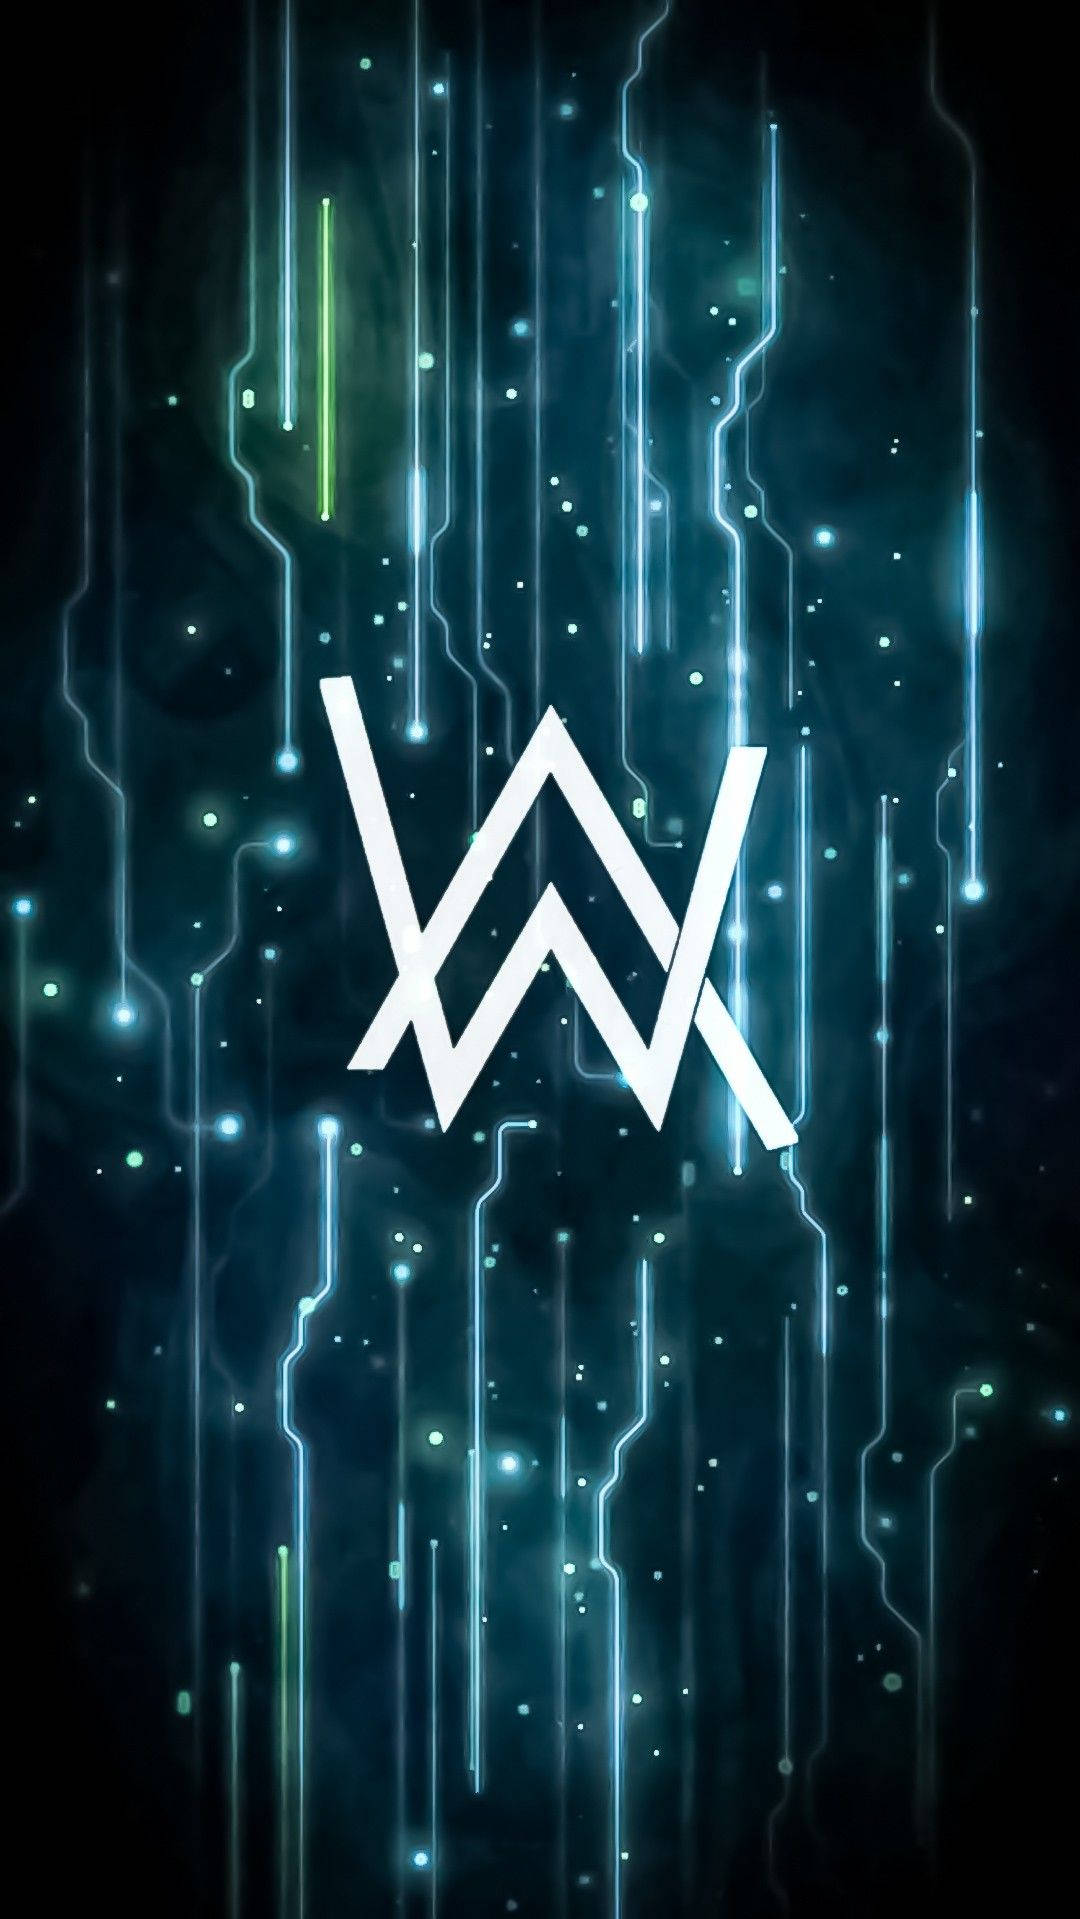 White Alan Walker Logo With Abstract Background Wallpaper